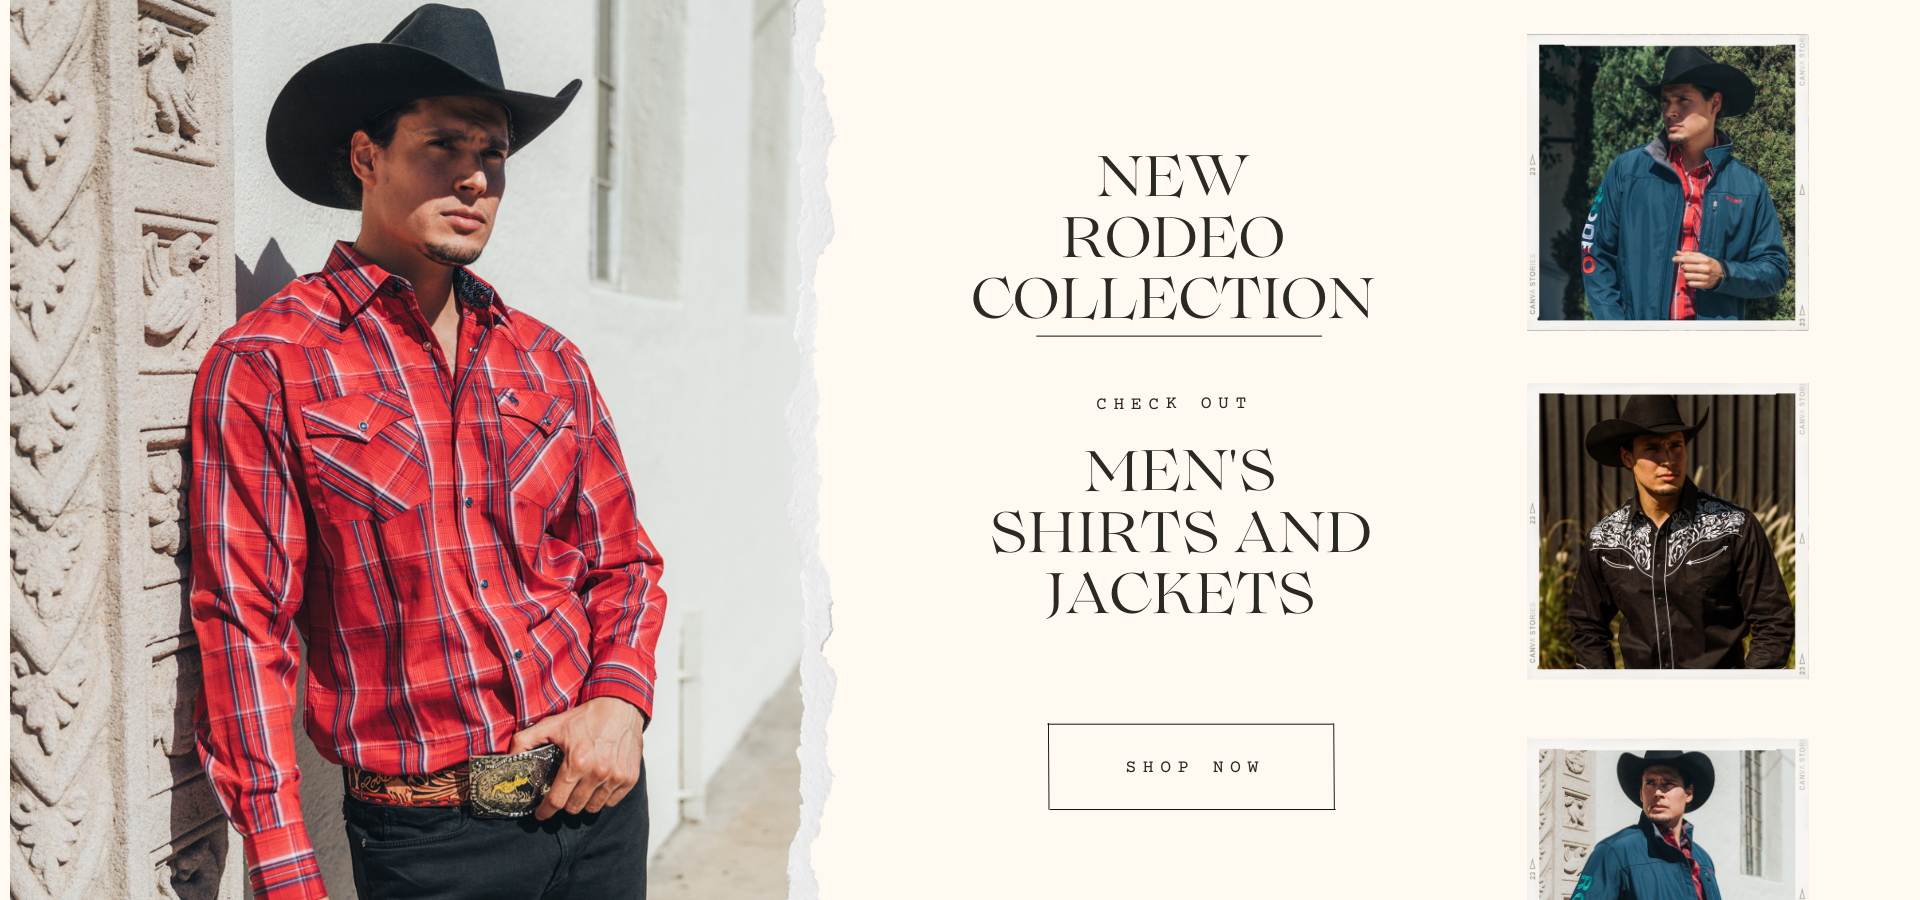 Rodeo Clothing Retail Store | Western Apparel